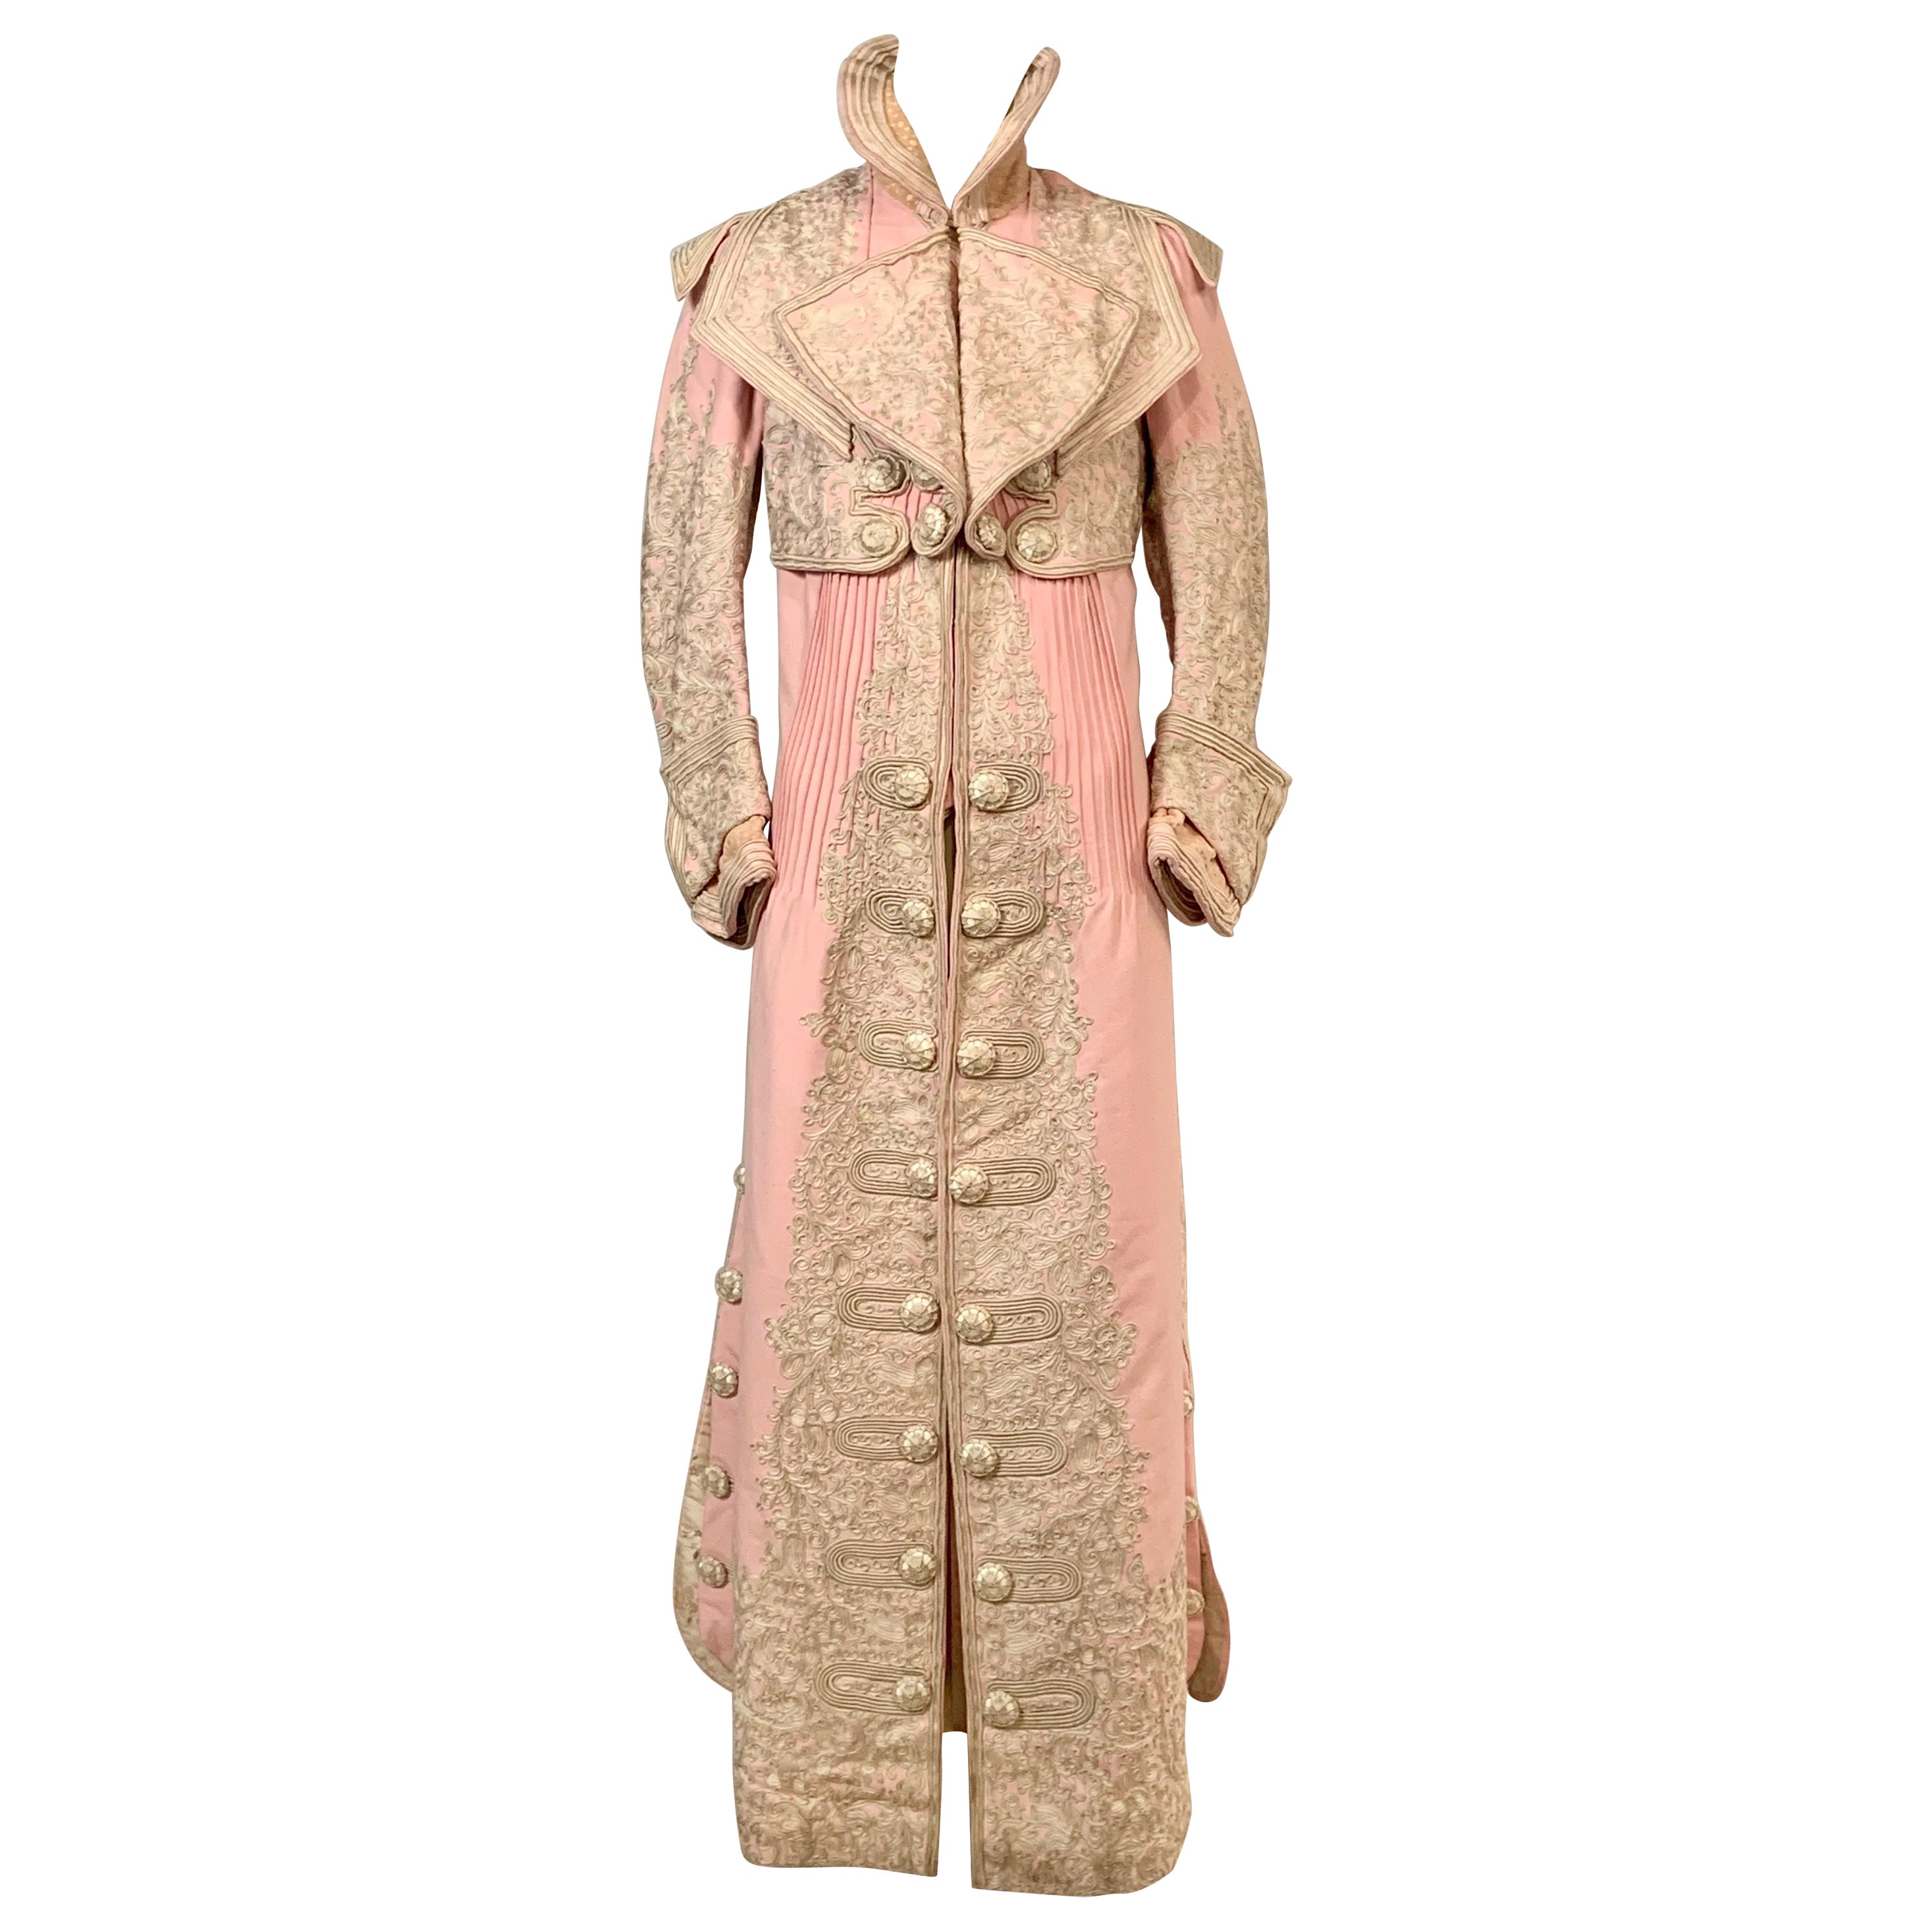 Bright Pink Wool Coat with Elaborate Ribbon Work and Button Trim Circa 1900